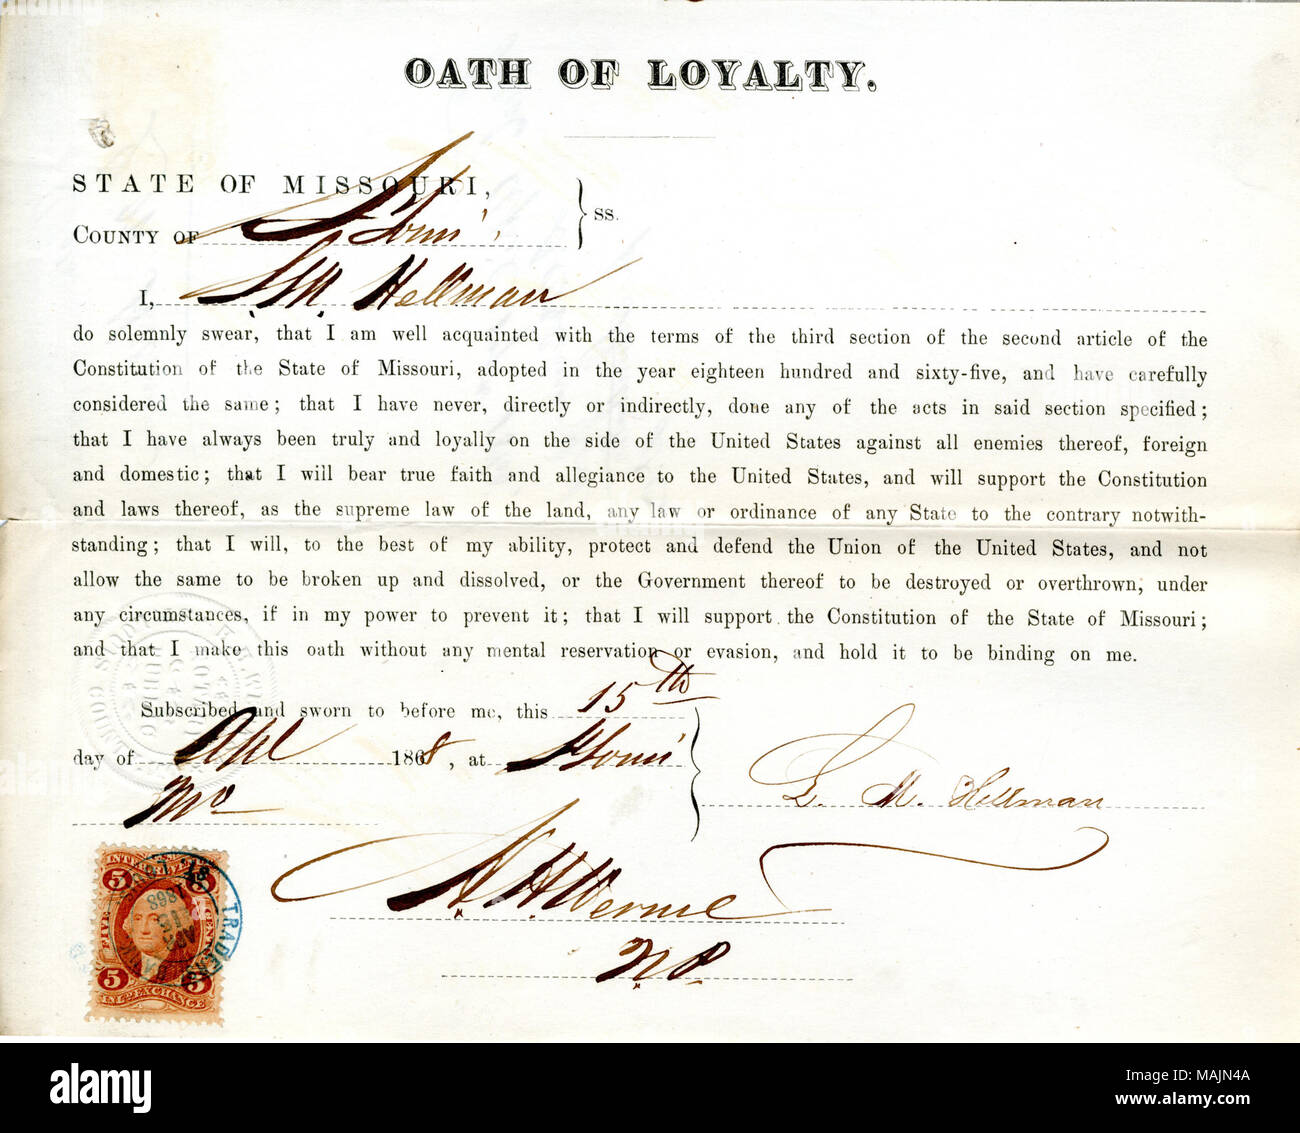 Swears oath of allegiance to the Government of the United States and the State of Missouri. Title: Loyalty oath of L. M. Hellman of Missouri, County of St. Louis  . 17 April 1868. Hellman, L. Stock Photo